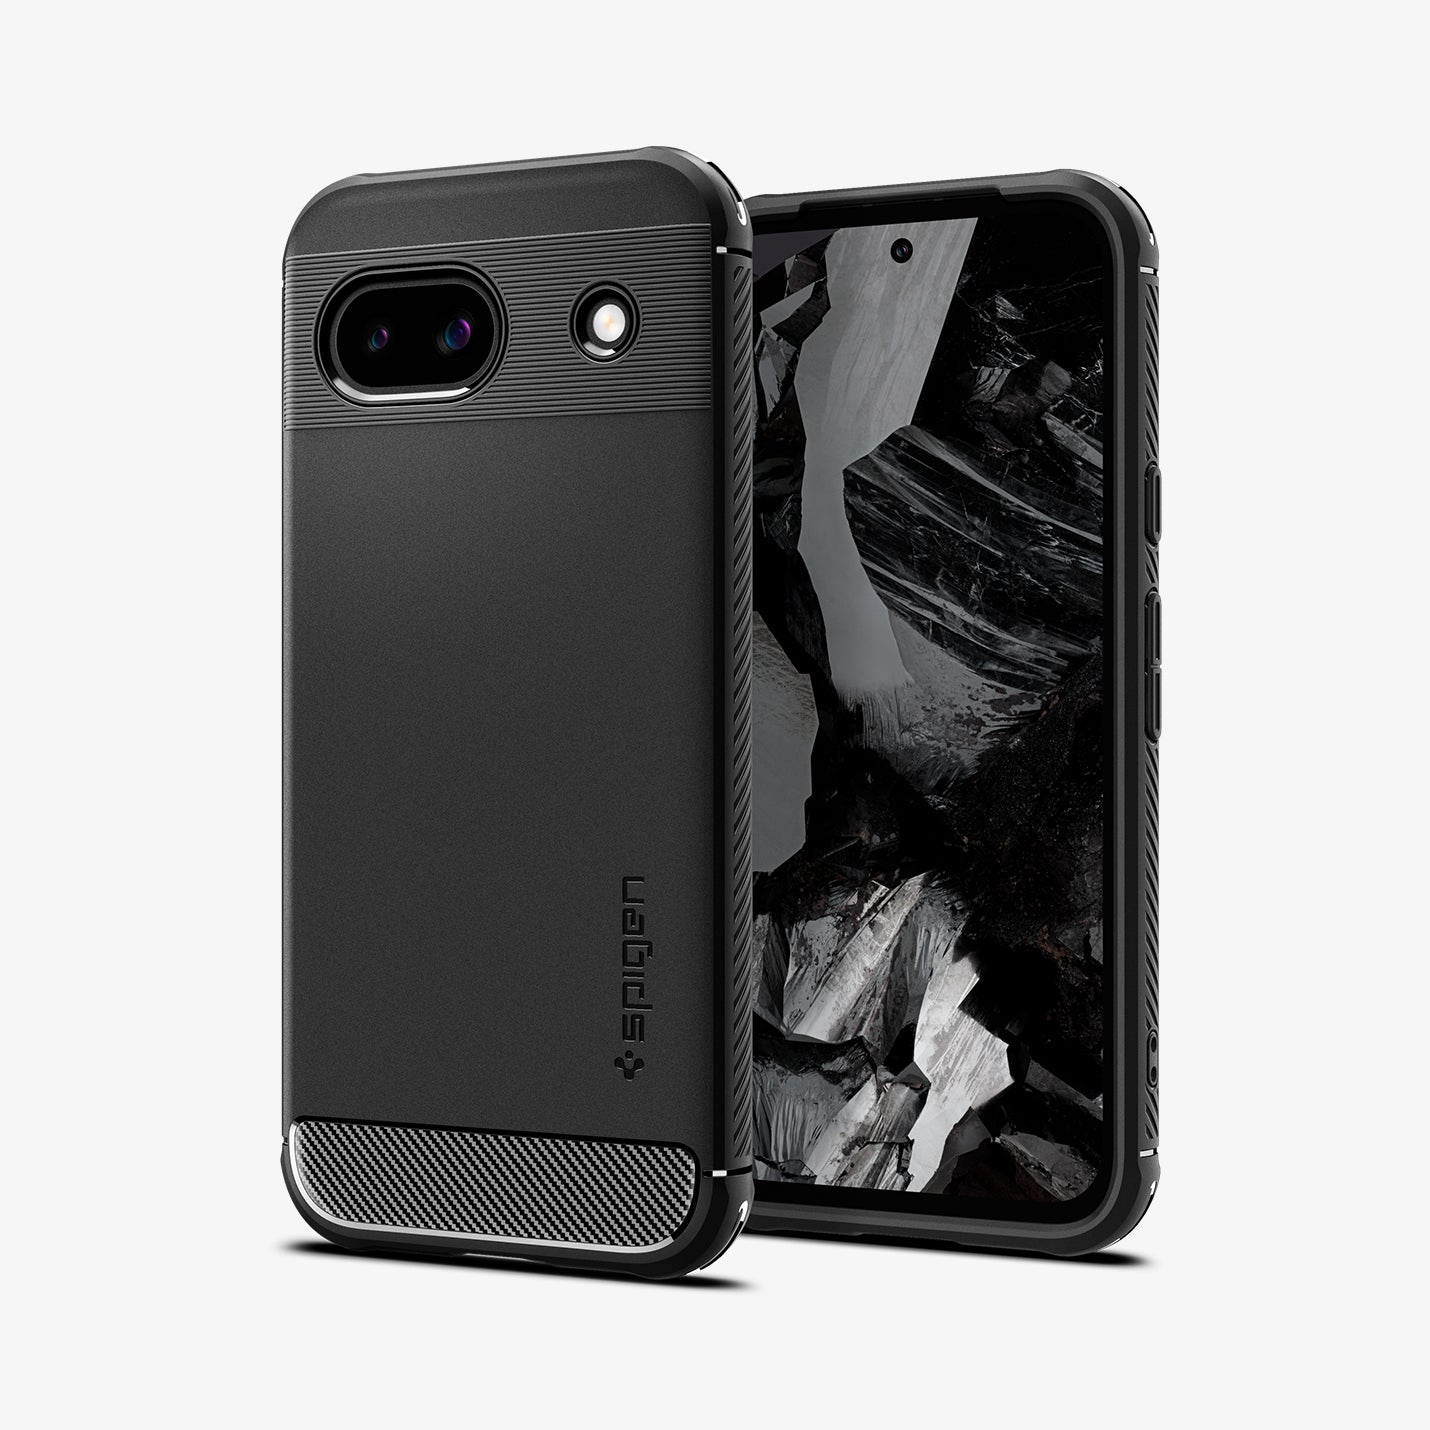 ACS07259 - Pixel 8a Case Rugged Armor in Matte Black showing the back, partial front and sides